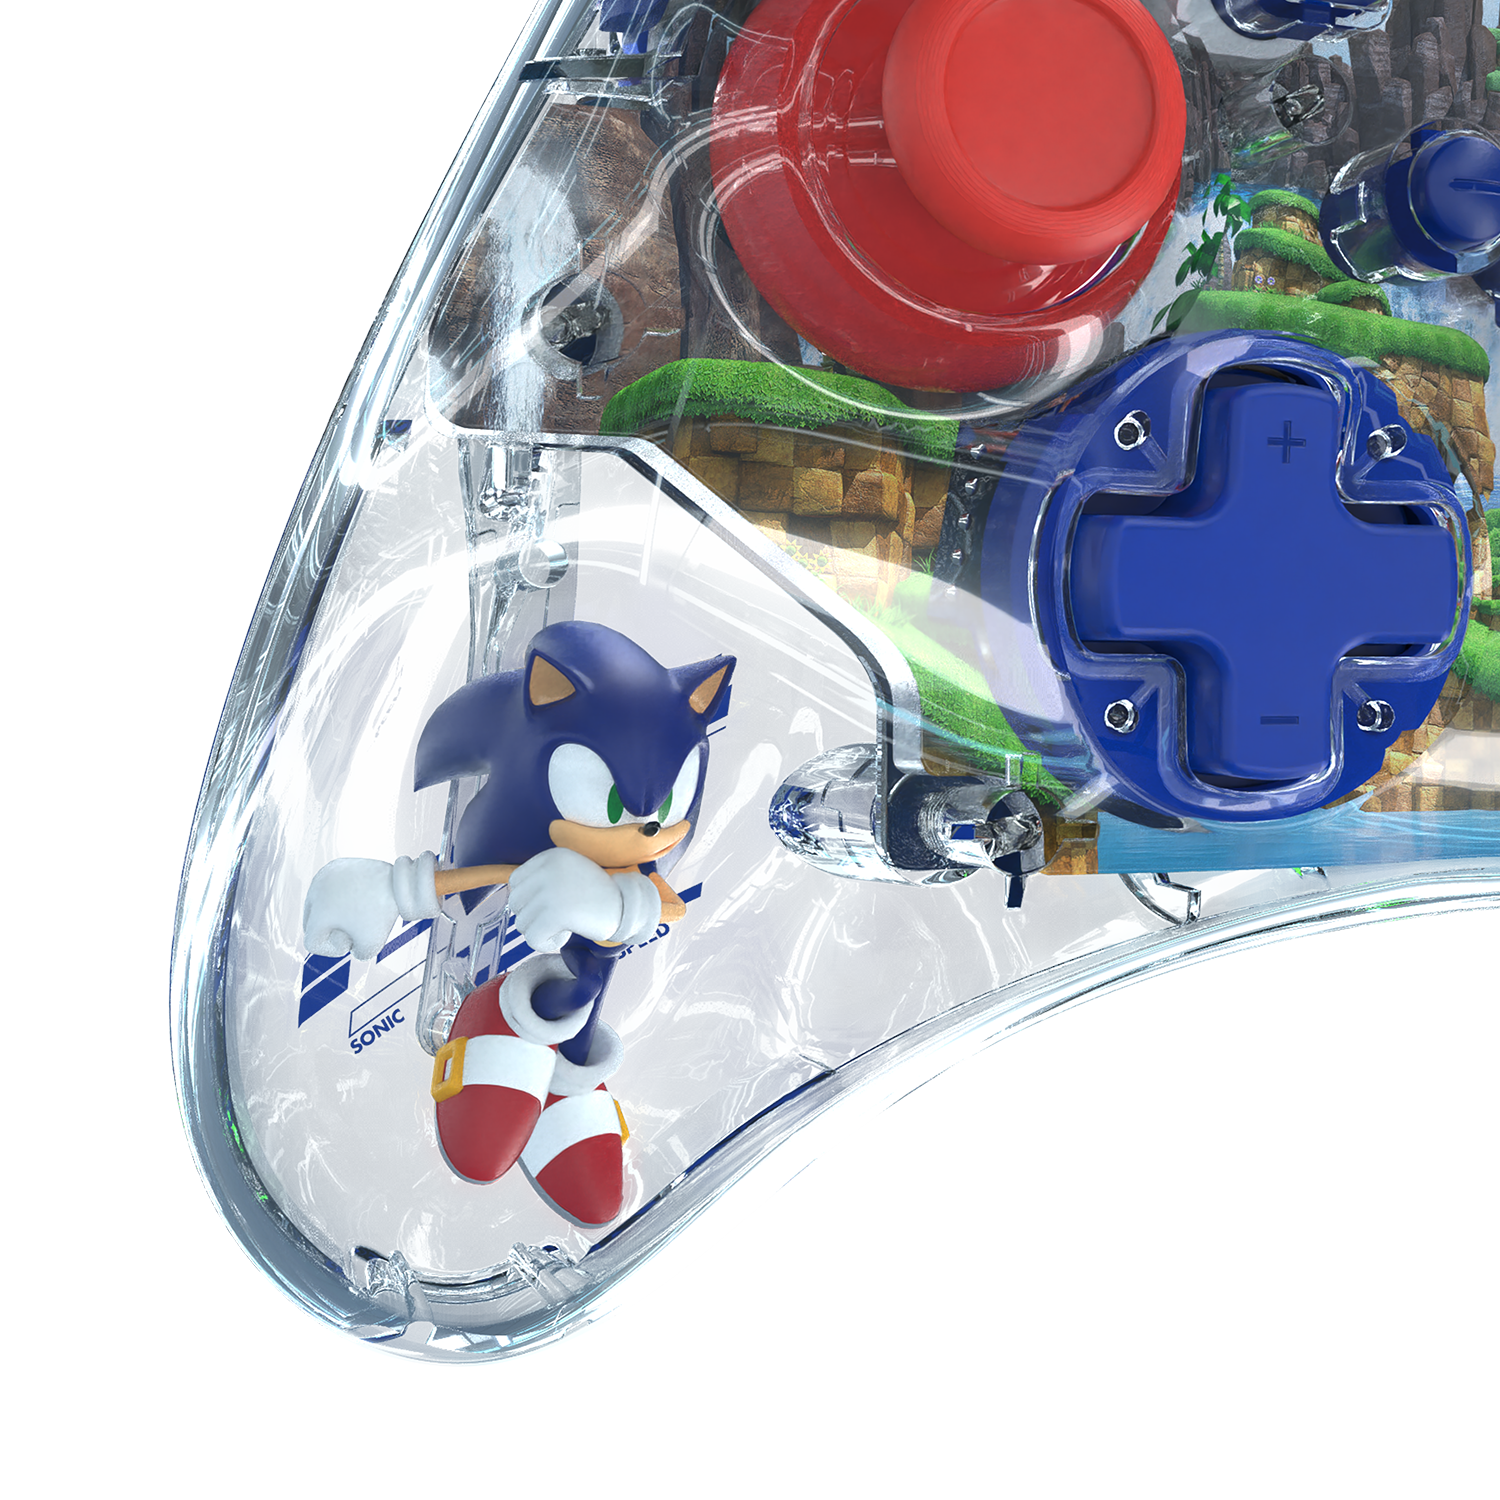 Pdp Realmz Wireless Controller For Nintendo Switch - Sonic : Target